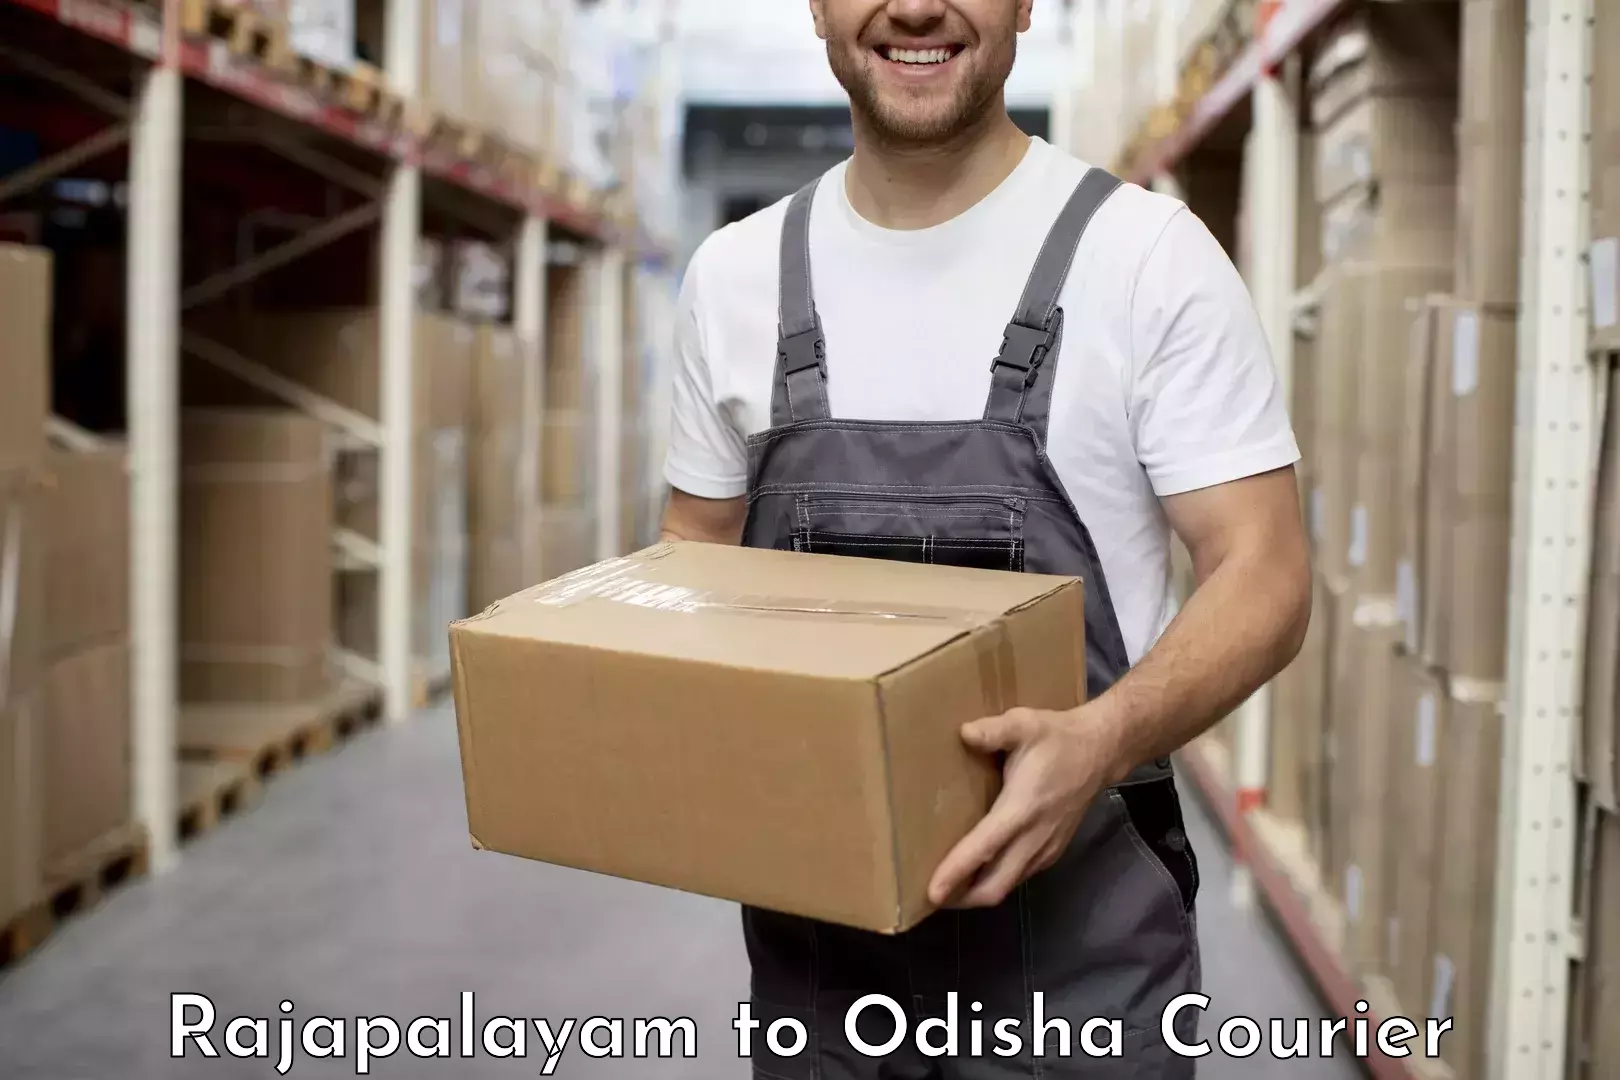 State-of-the-art courier technology Rajapalayam to Khariar